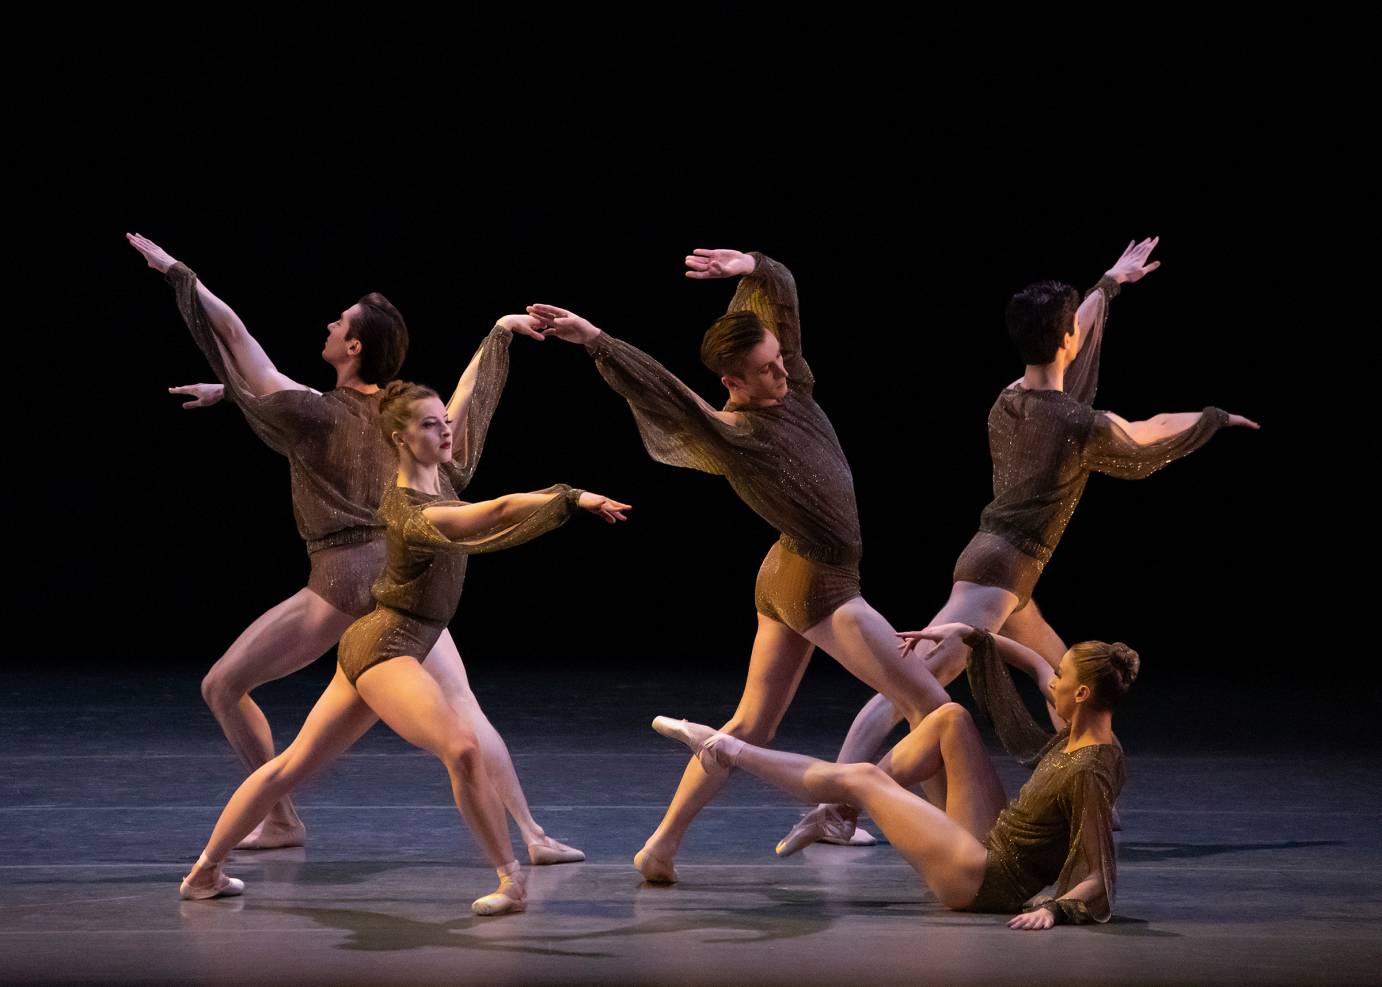 Dancers in brown pose with their arms extended